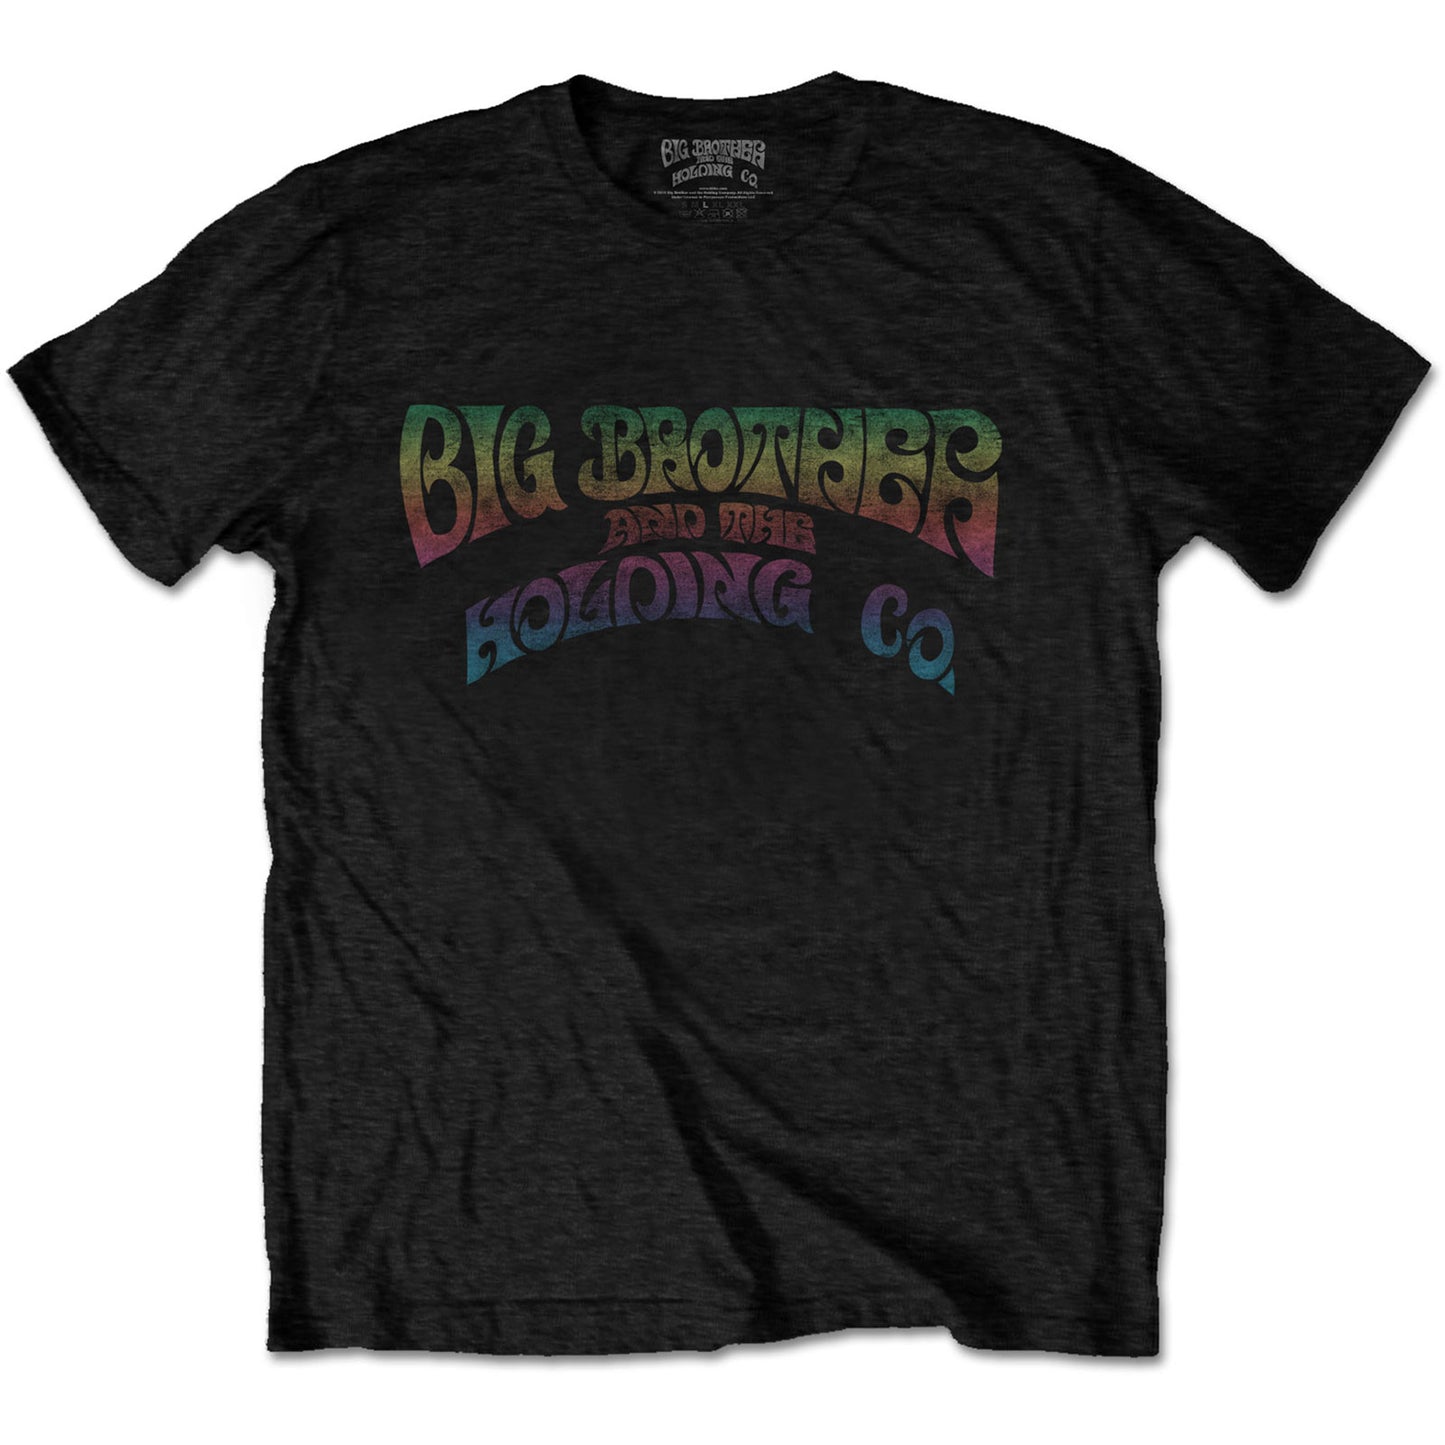 Big Brother & The Holding Company T-Shirt: Vintage Logo